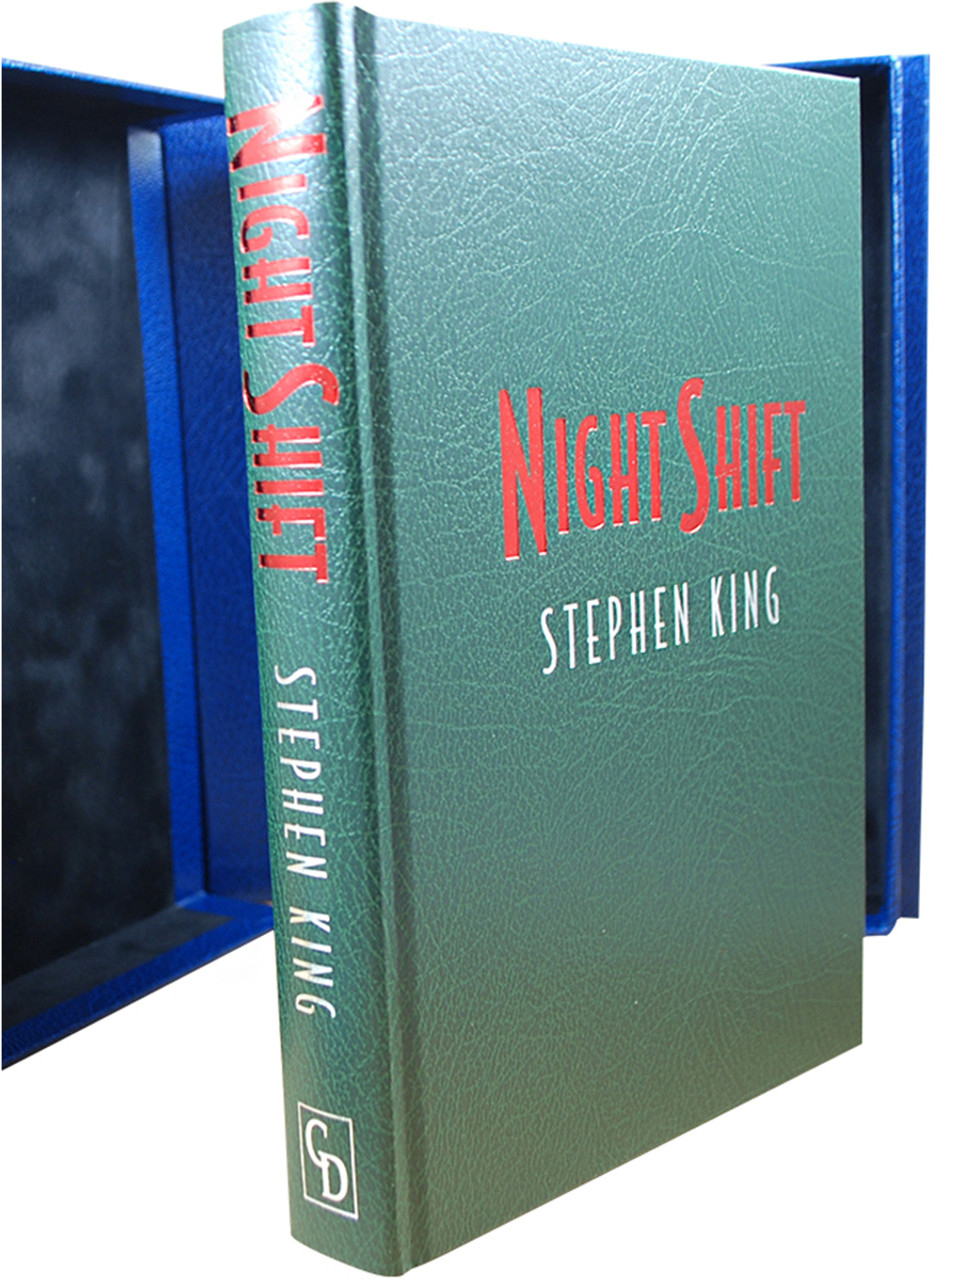 Stephen King "Night Shift” Traycased Deluxe Signed Limited Artist Edition No. 82 of 750 (One of only 100 Signed and Remarqued by Glenn Chadbourne)